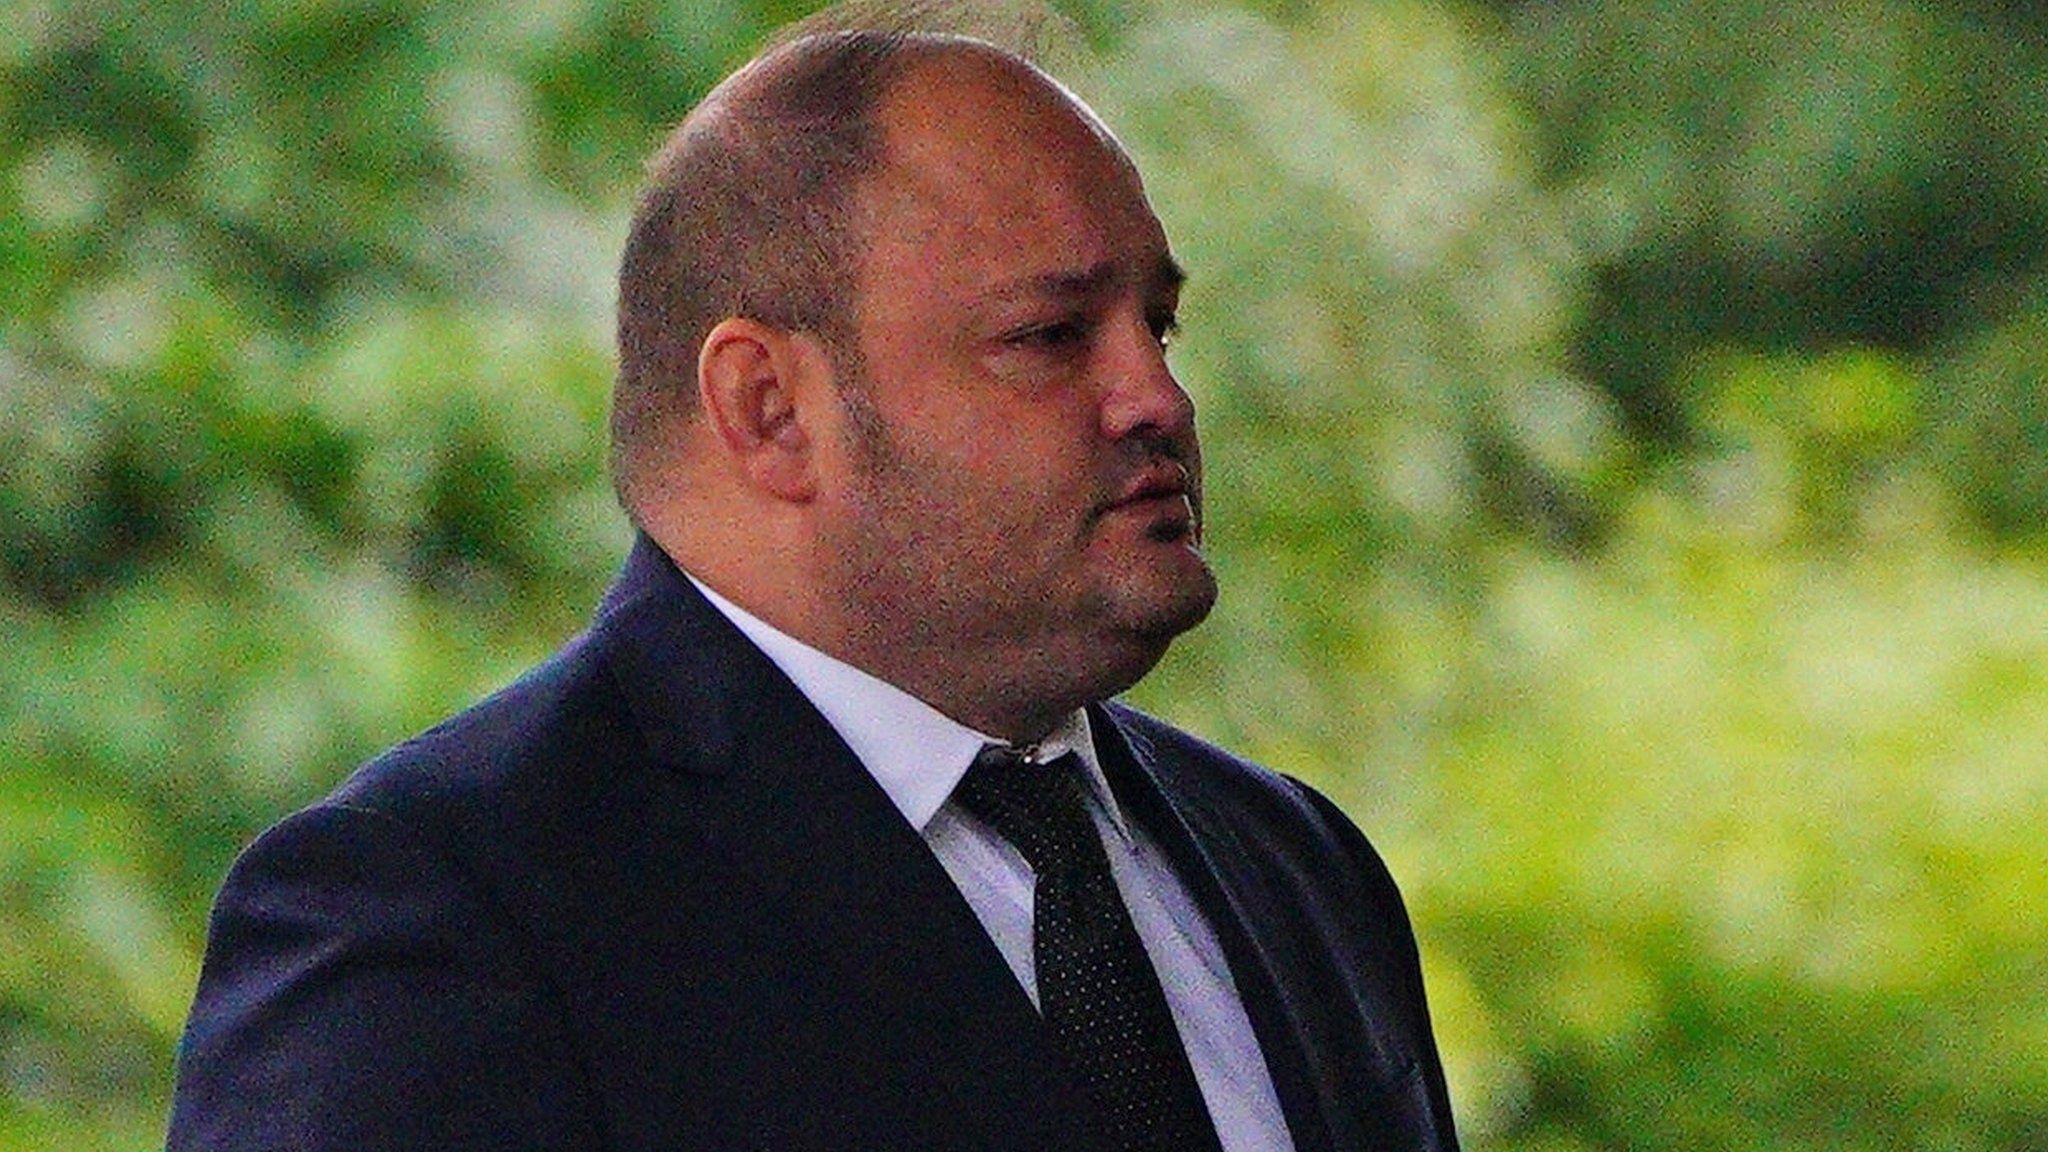 Gwent Police officer abused girl and showed her porn, court hears image